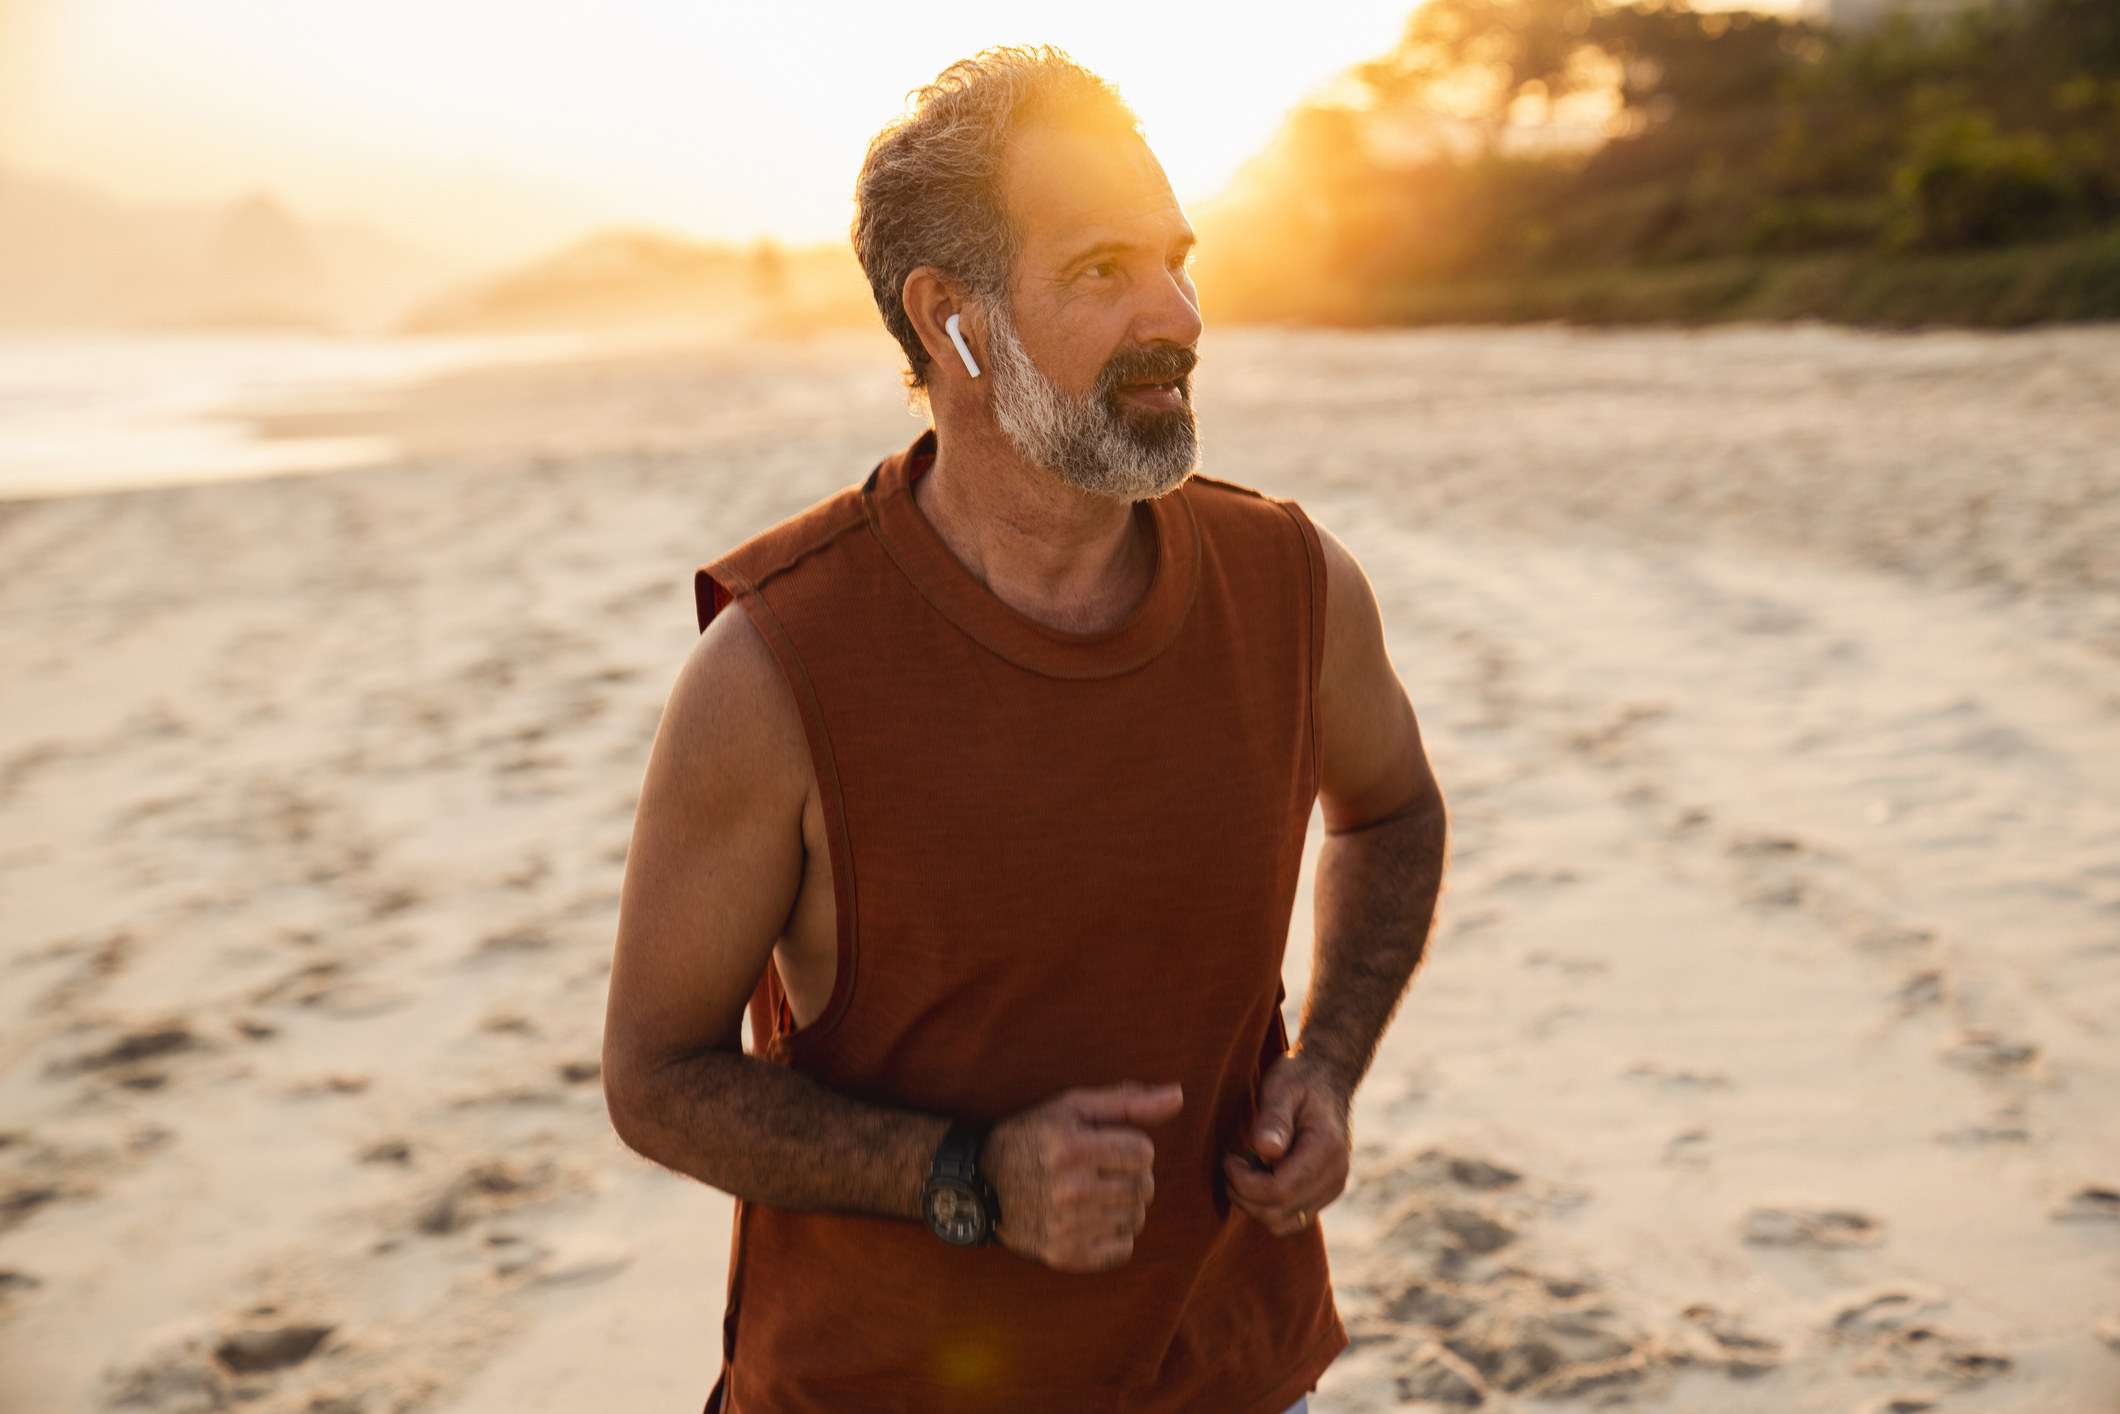 A man runs on the beach in the morning with wireless headphones